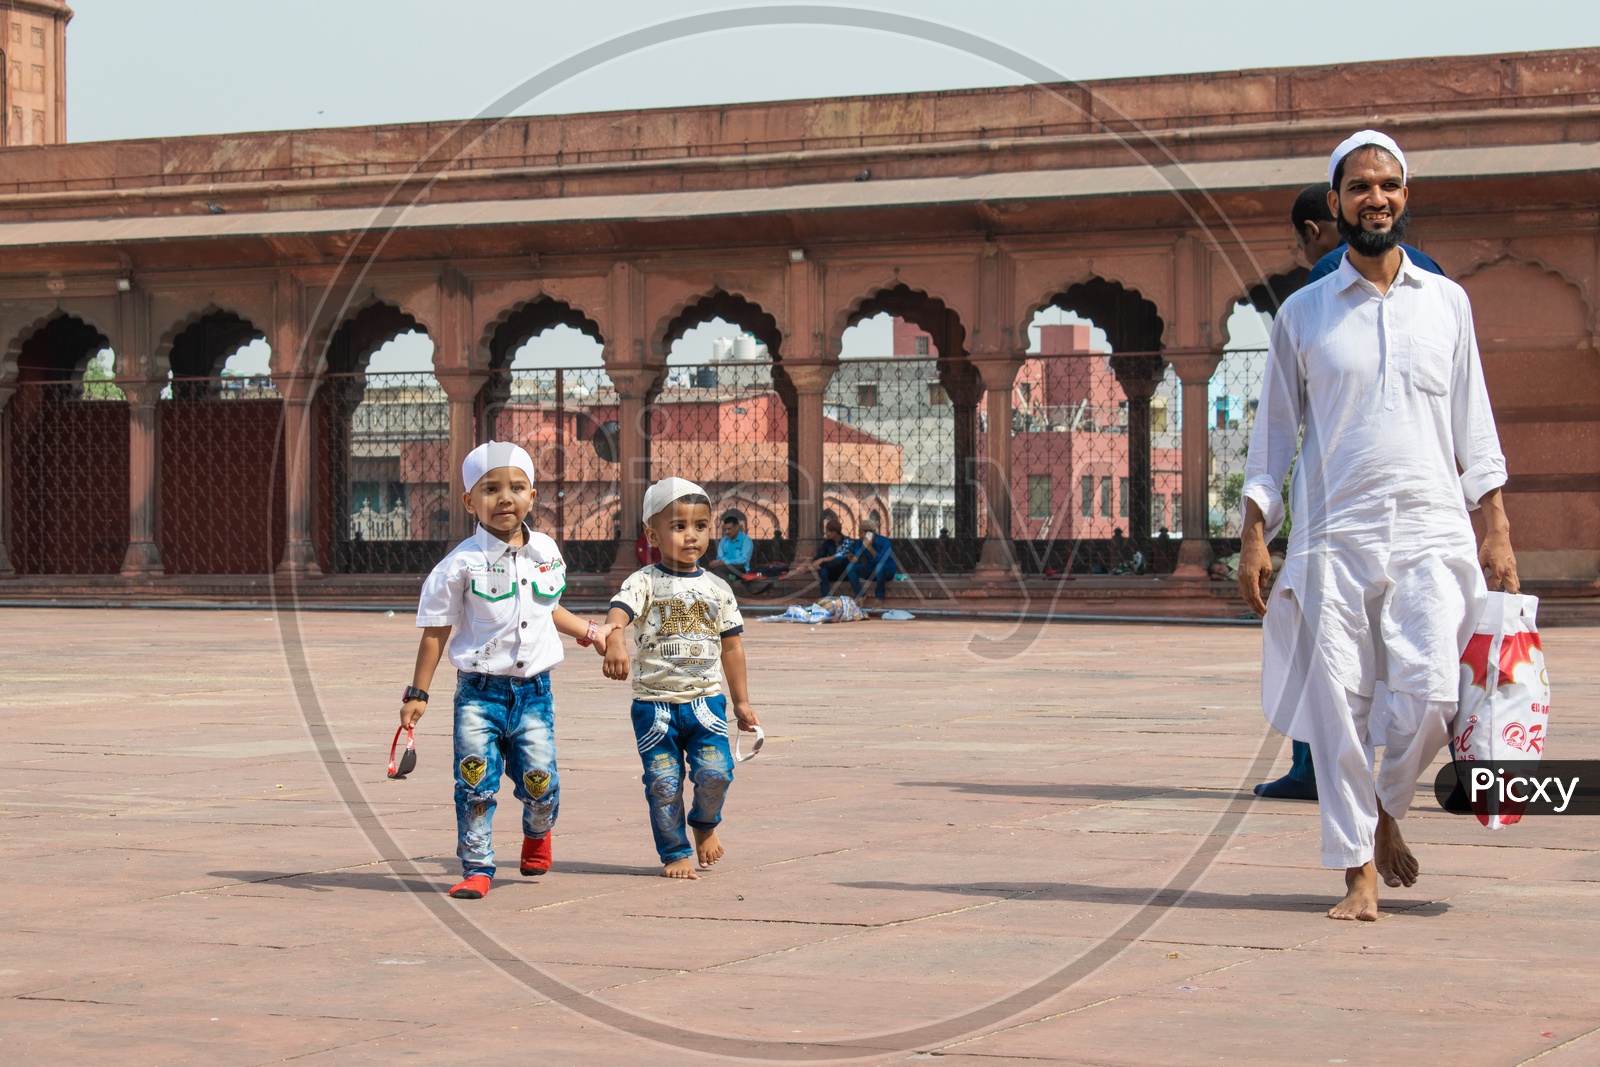 Brothers holding hands and their father on the day of Eid-ul-Fitr (End of the holy month of Ramadan) at Jama Masjid, Delhi